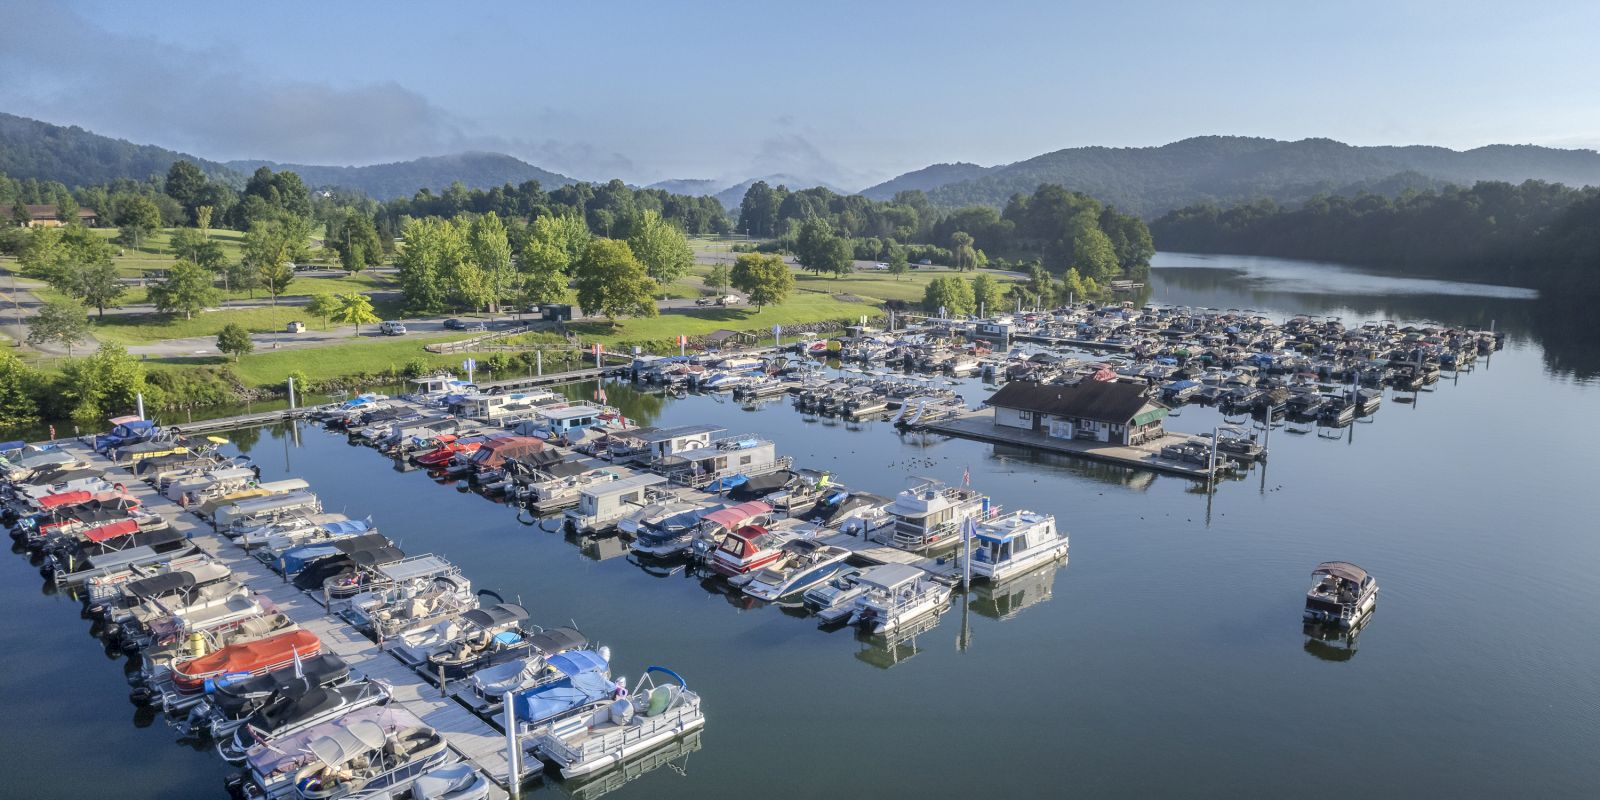 The image shows a marina with numerous boats docked on a calm lake. Surrounding the marina are green hills and a partially wooded area.